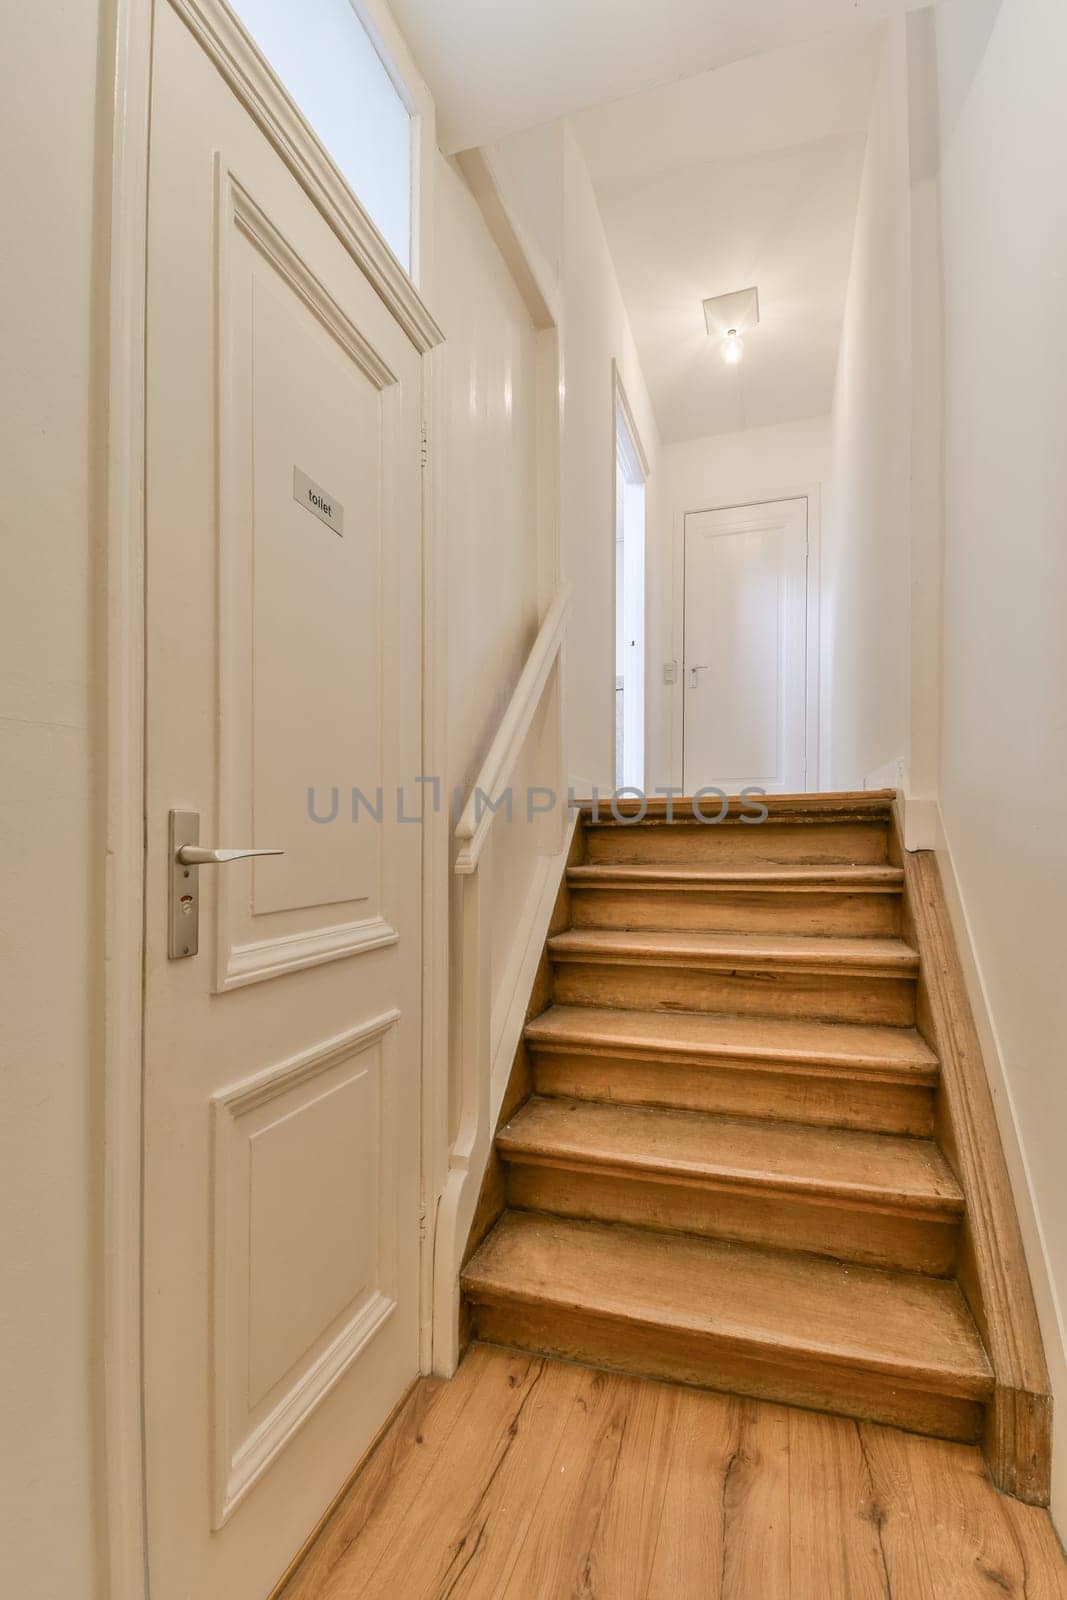 an empty hallway with wooden floors and white door leading to the second floor in a house or condo apartment building